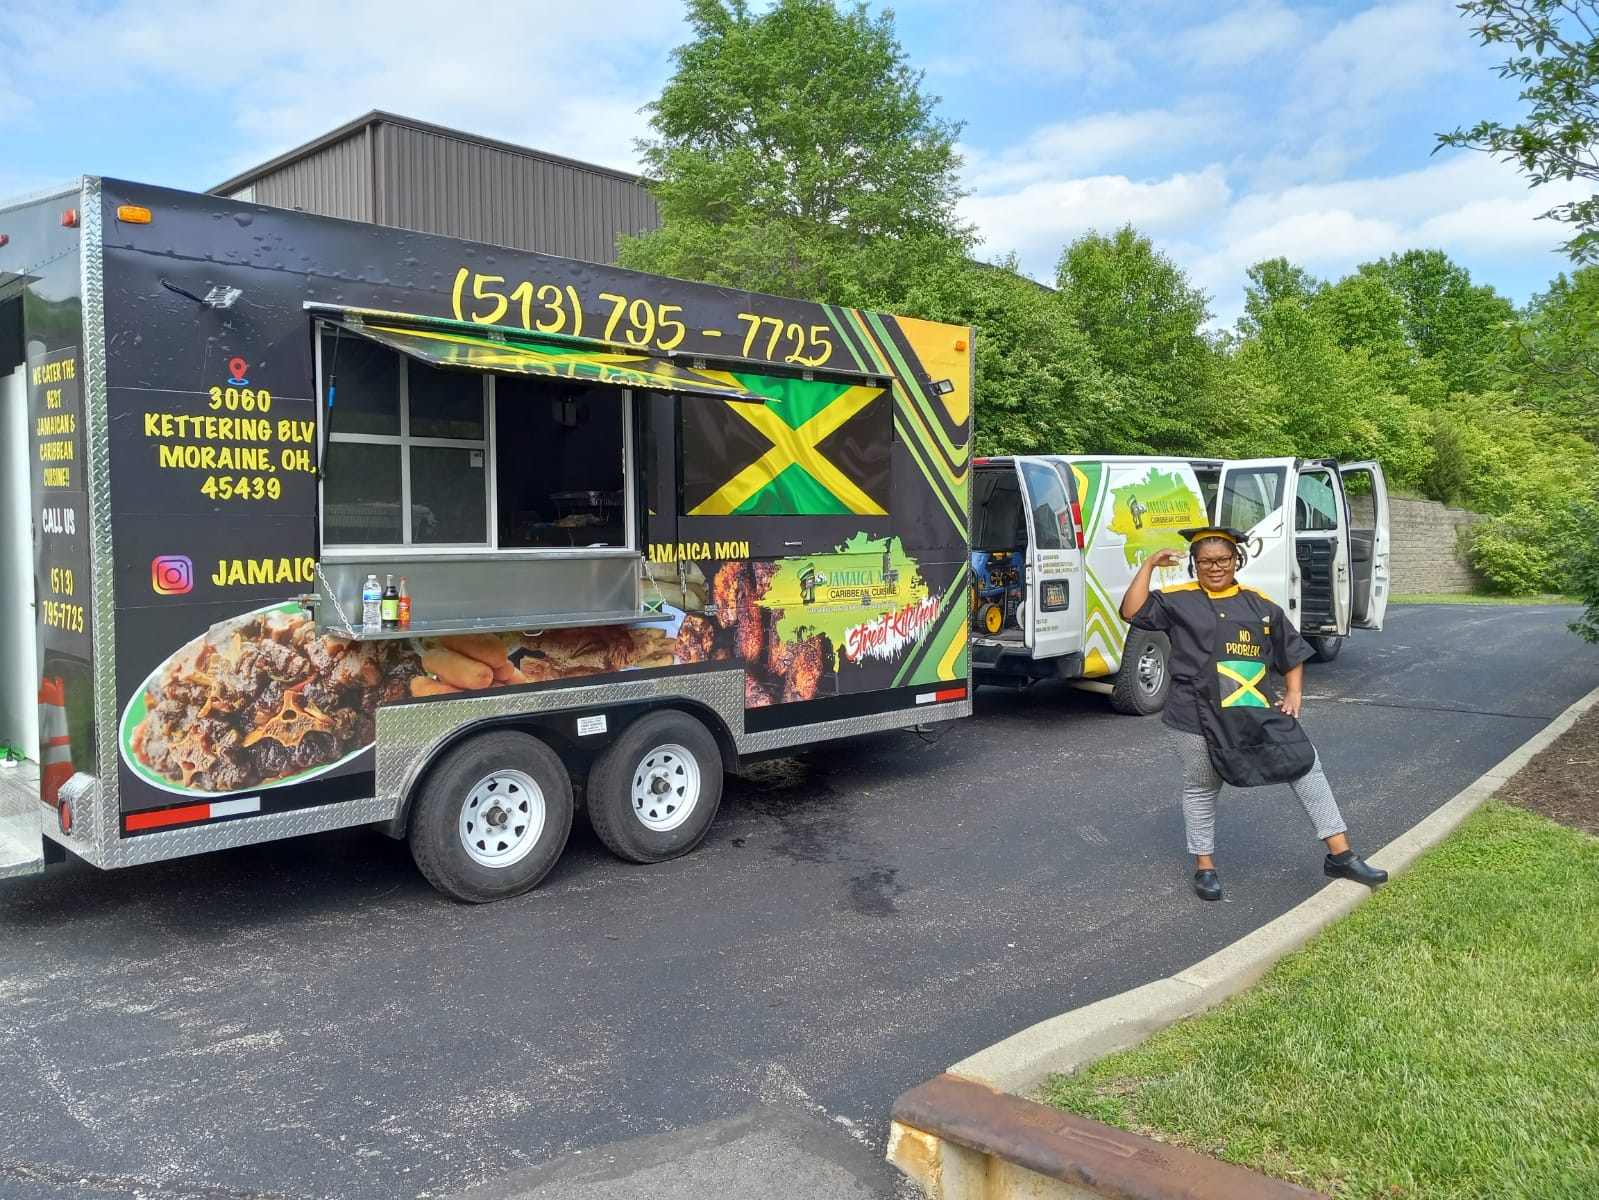 Jamaica Mon Caribbean Cuisine is moving to Moraine after closing its doors in Fairfield in February.